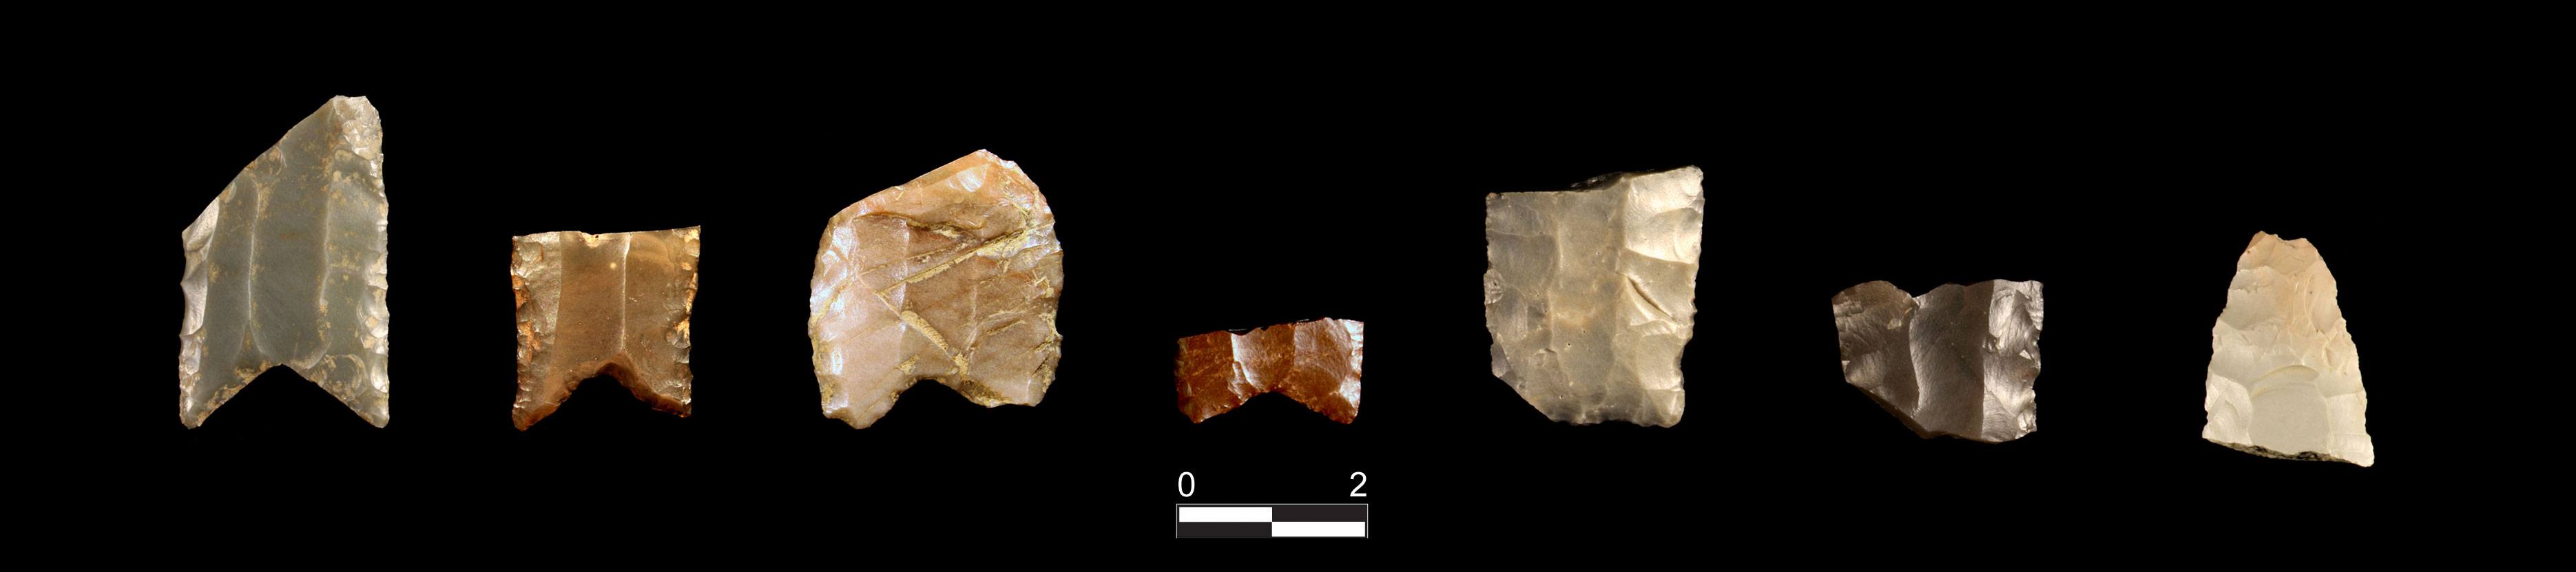 Spear points such as these with fluted edges prove that early inhabitants traveled all over North America